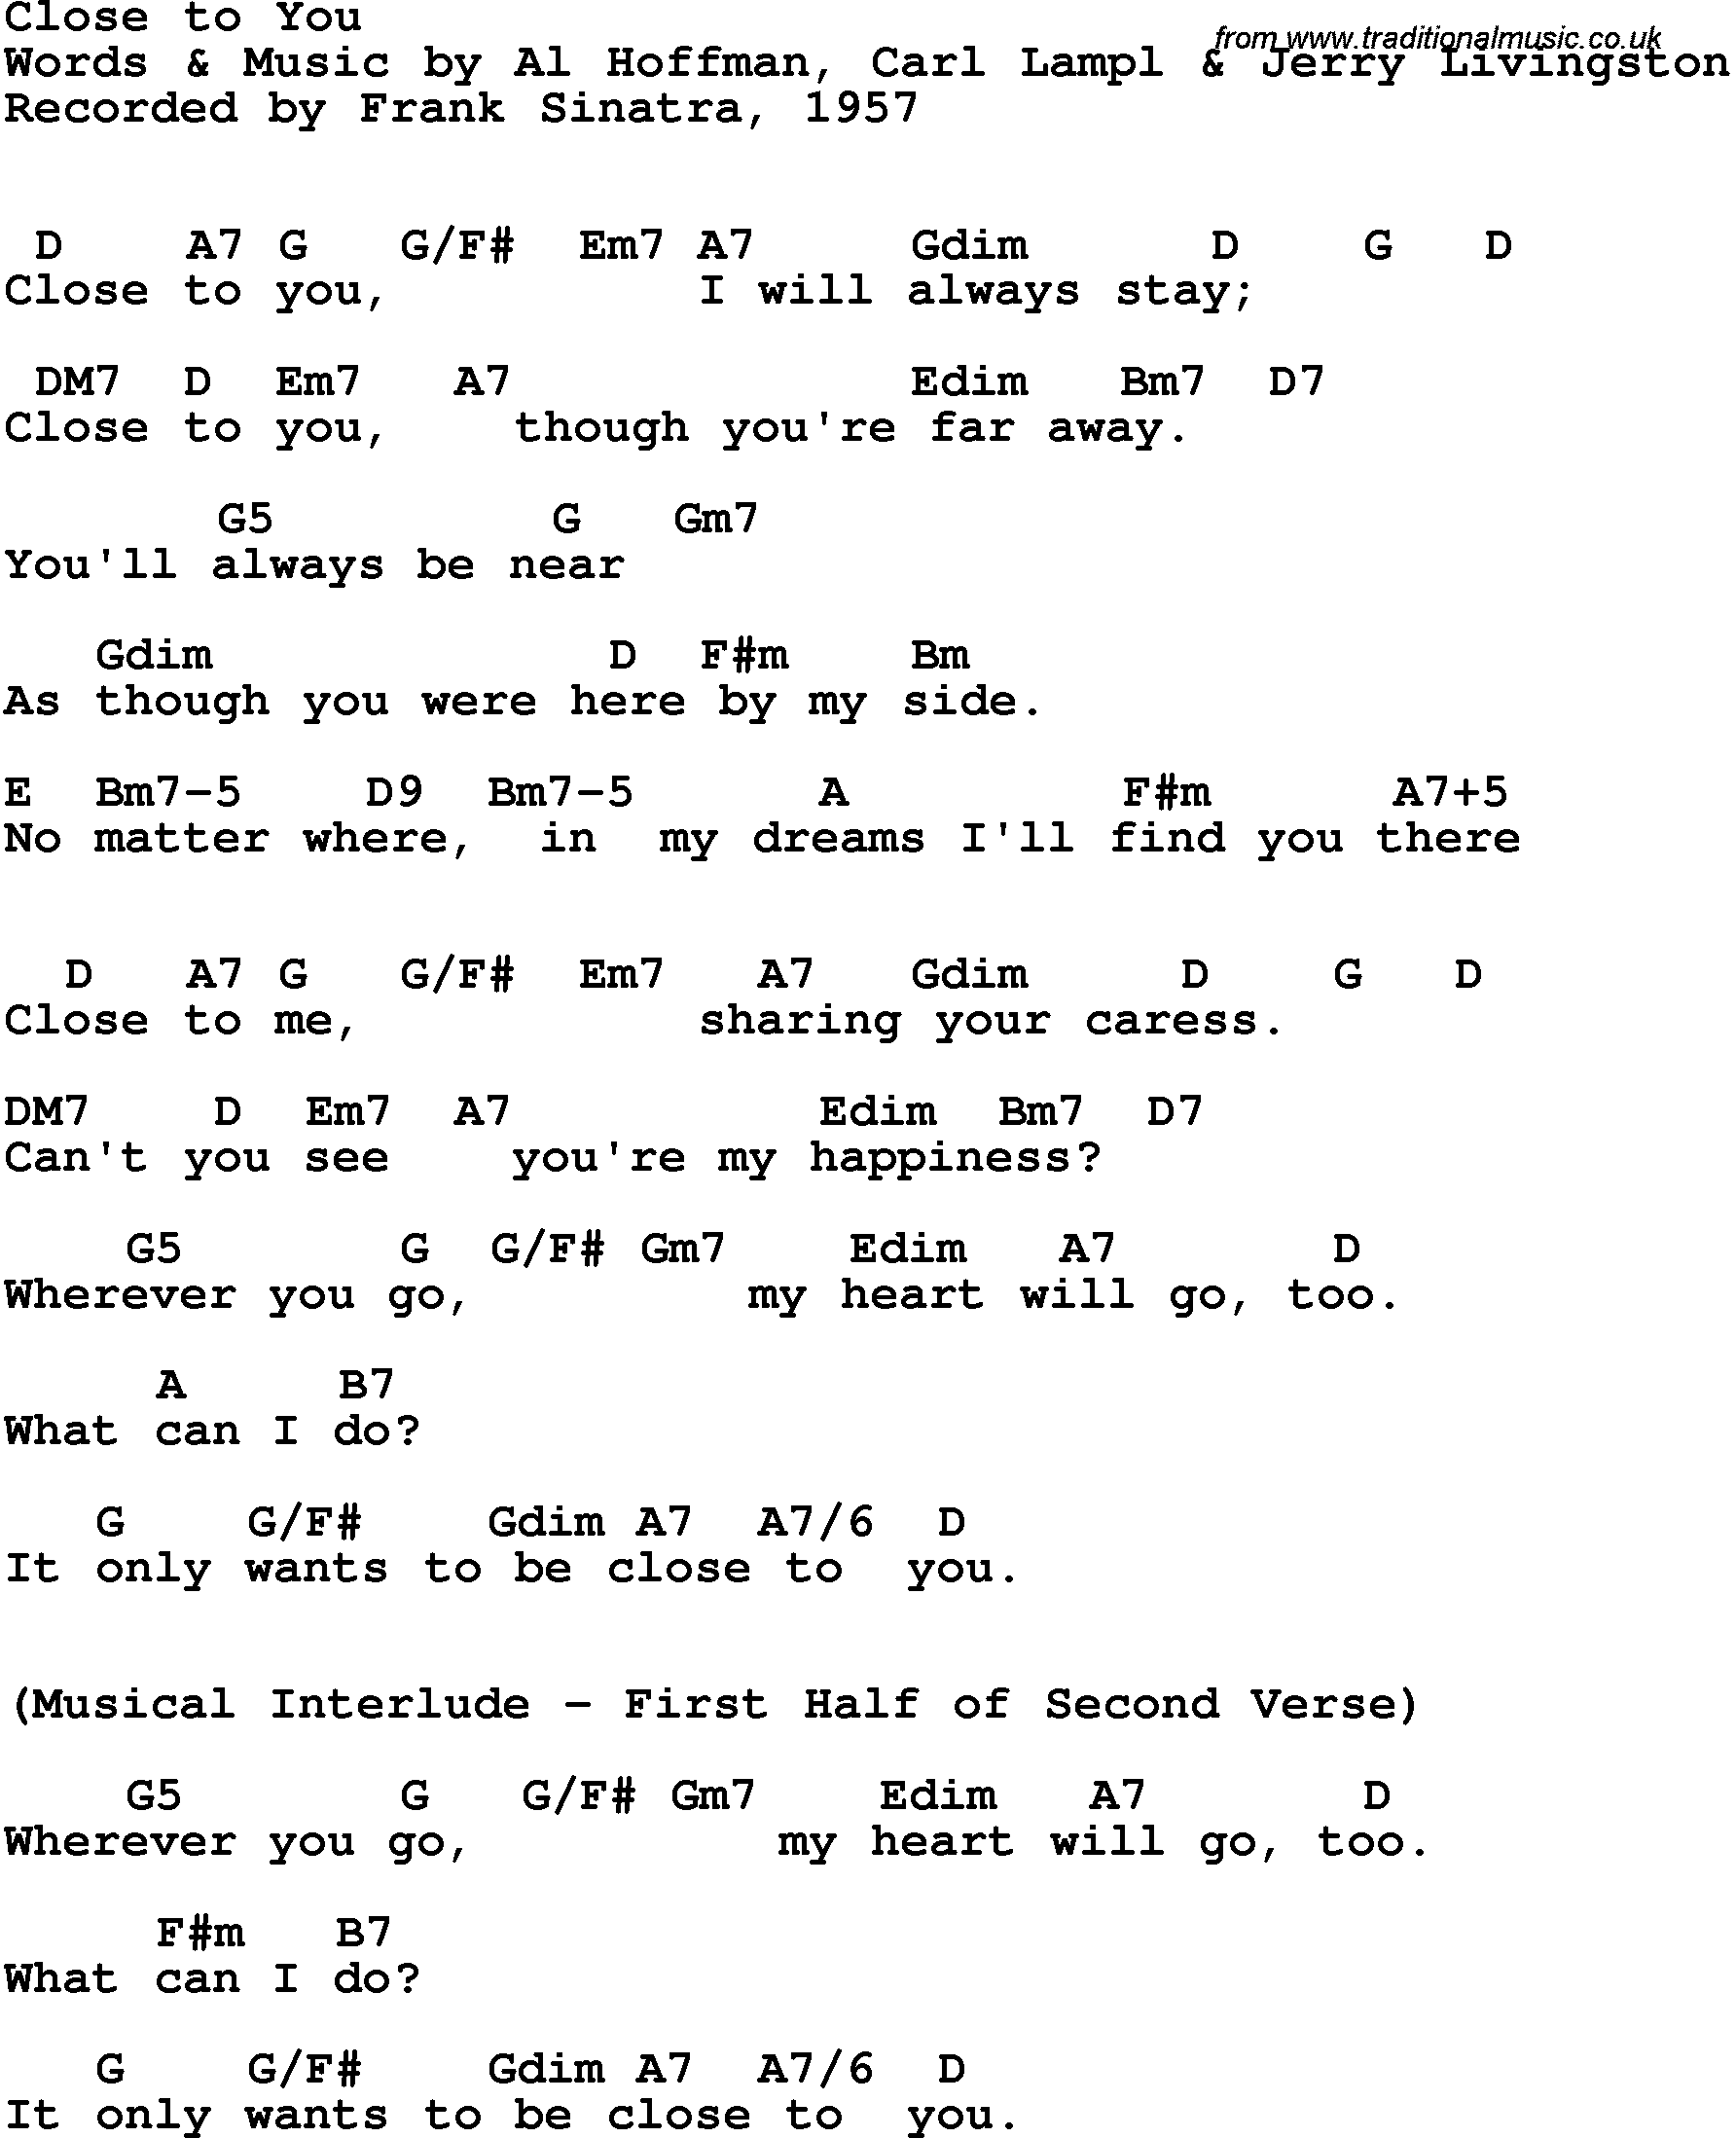 Song Lyrics with guitar chords for Close To You - Frank Sinatra, 1957